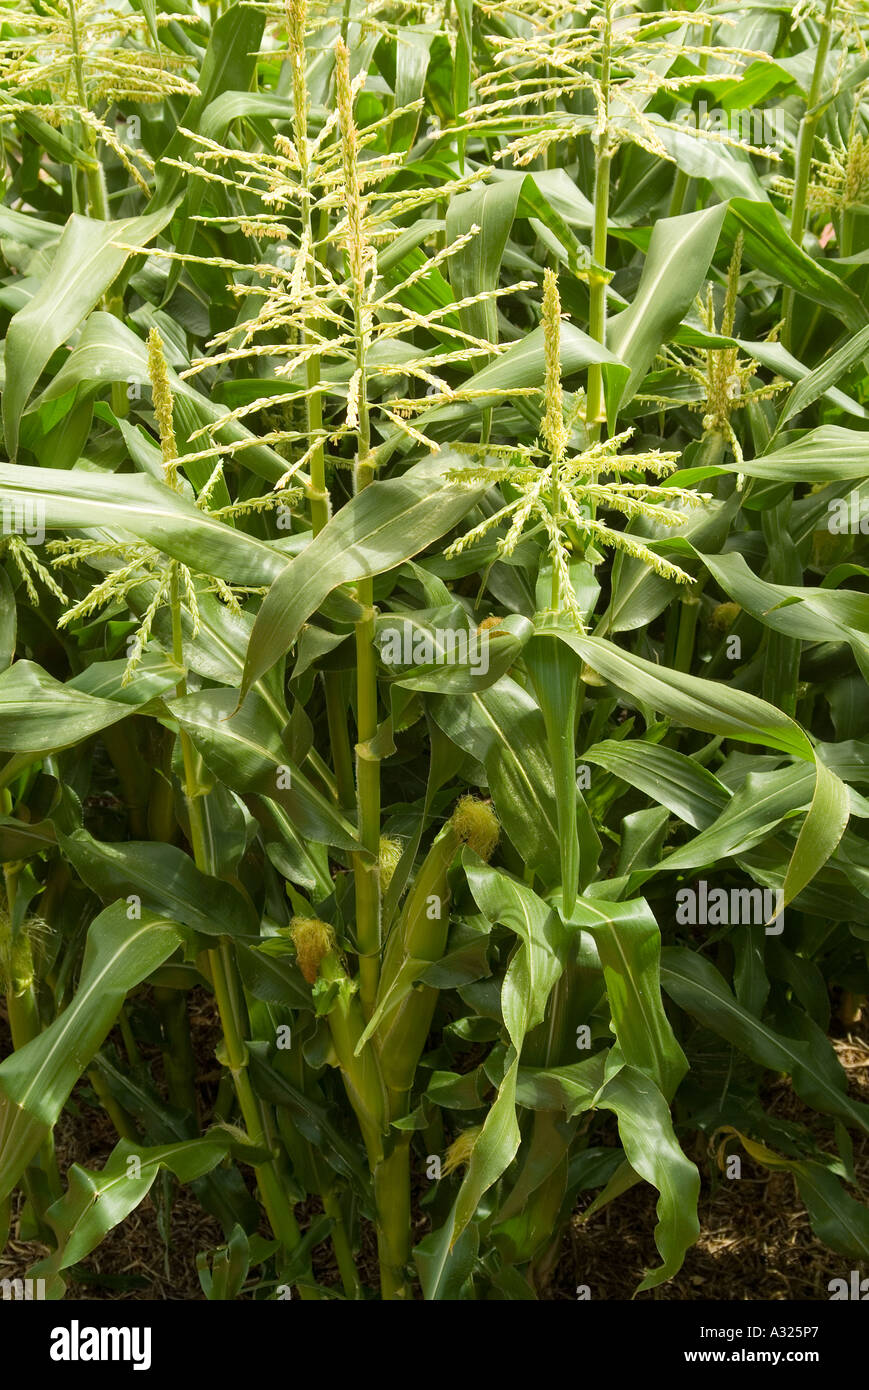 A patch of densely planted sweet corn Variety Snogold Stock Photo